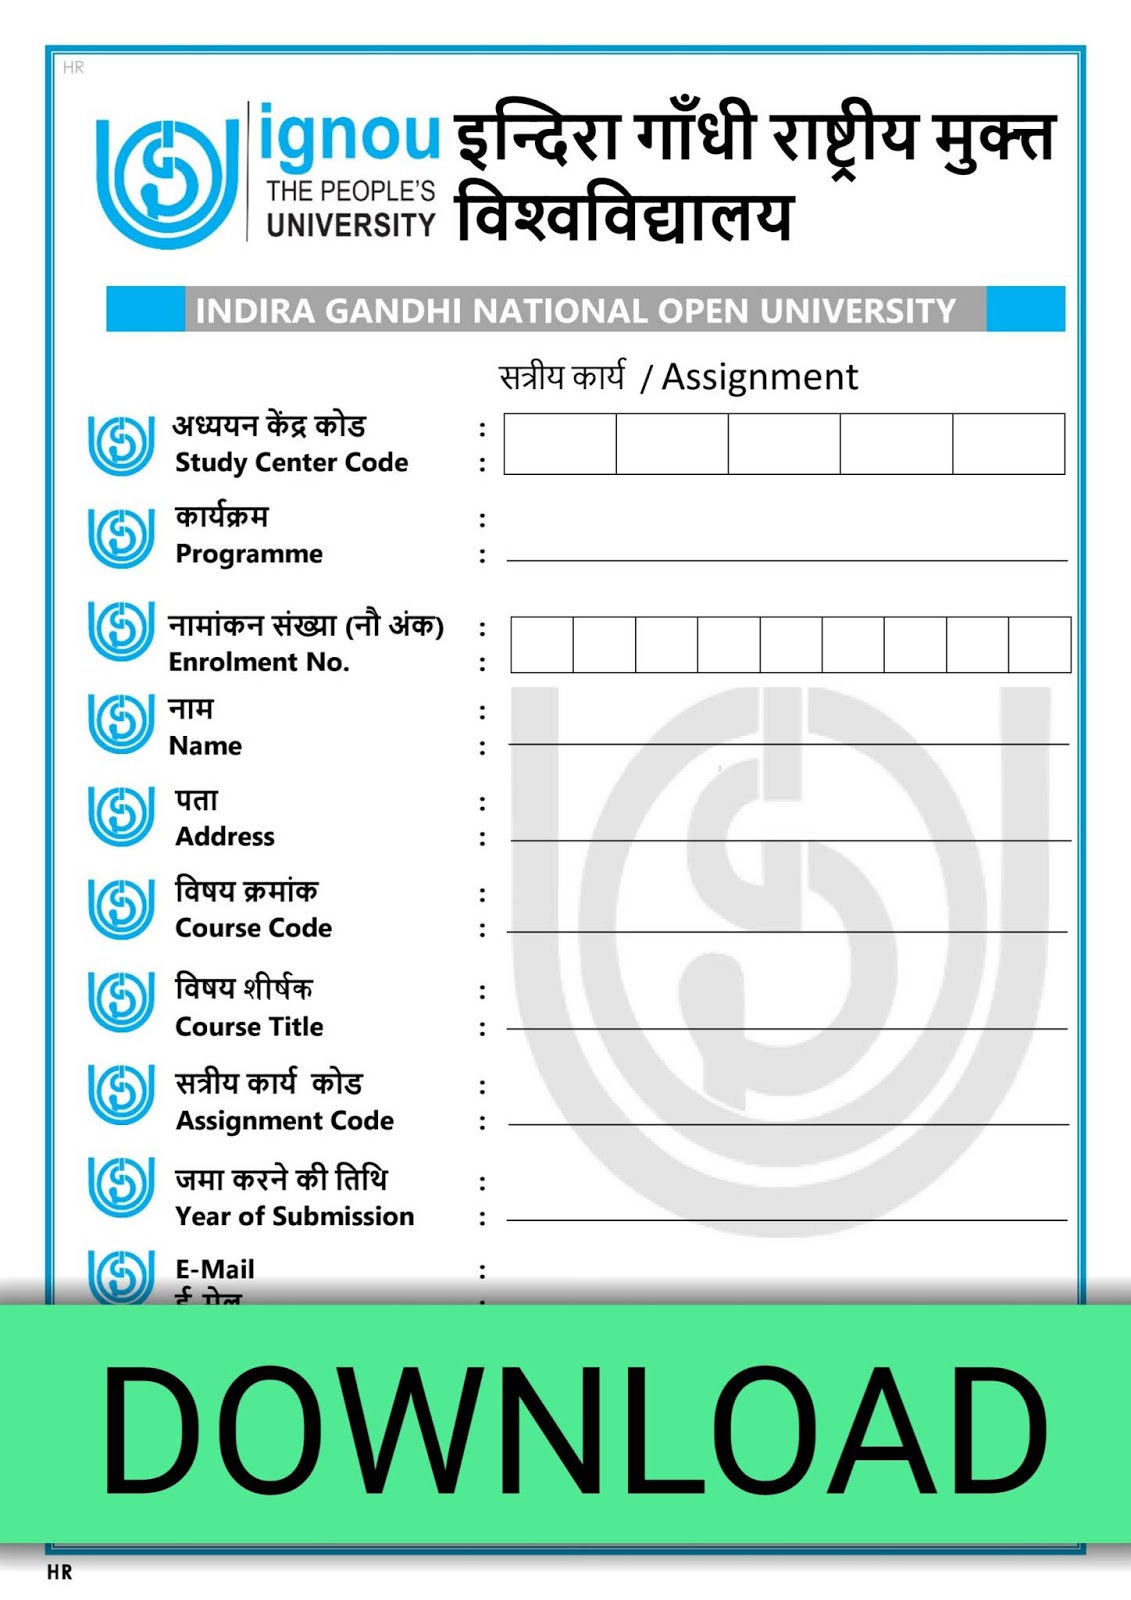 ignou old assignment download